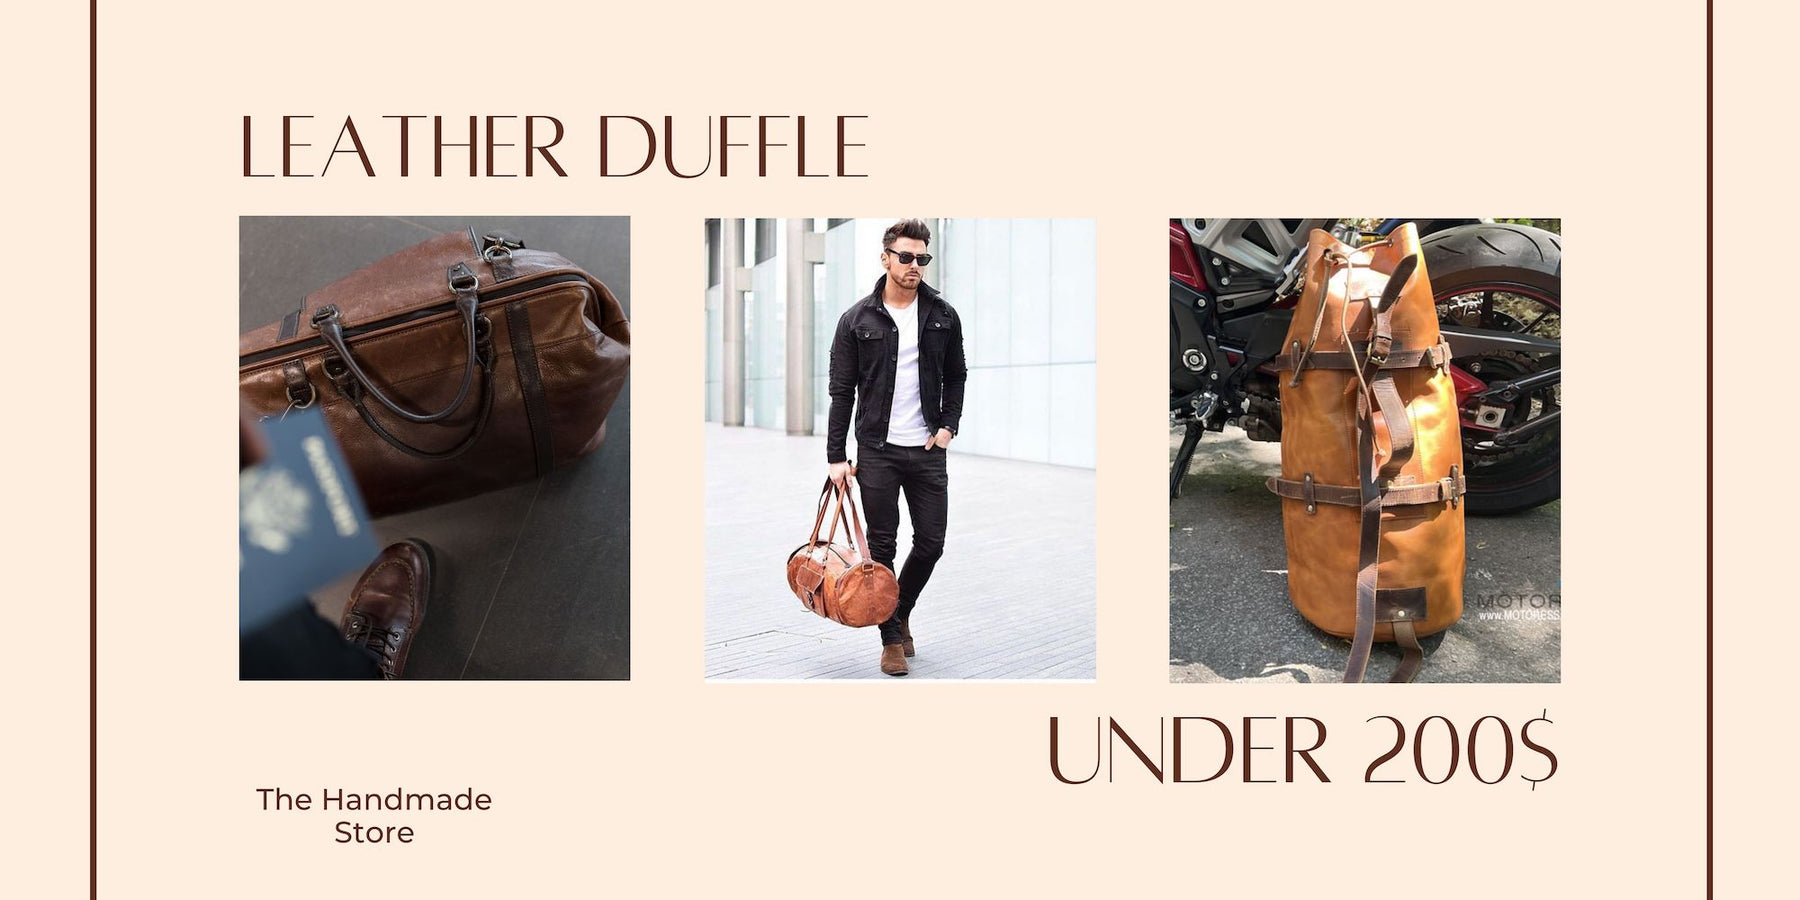 7 Affordable Brown Leather Duffle Bag (Under 200$) - The Handmade Store